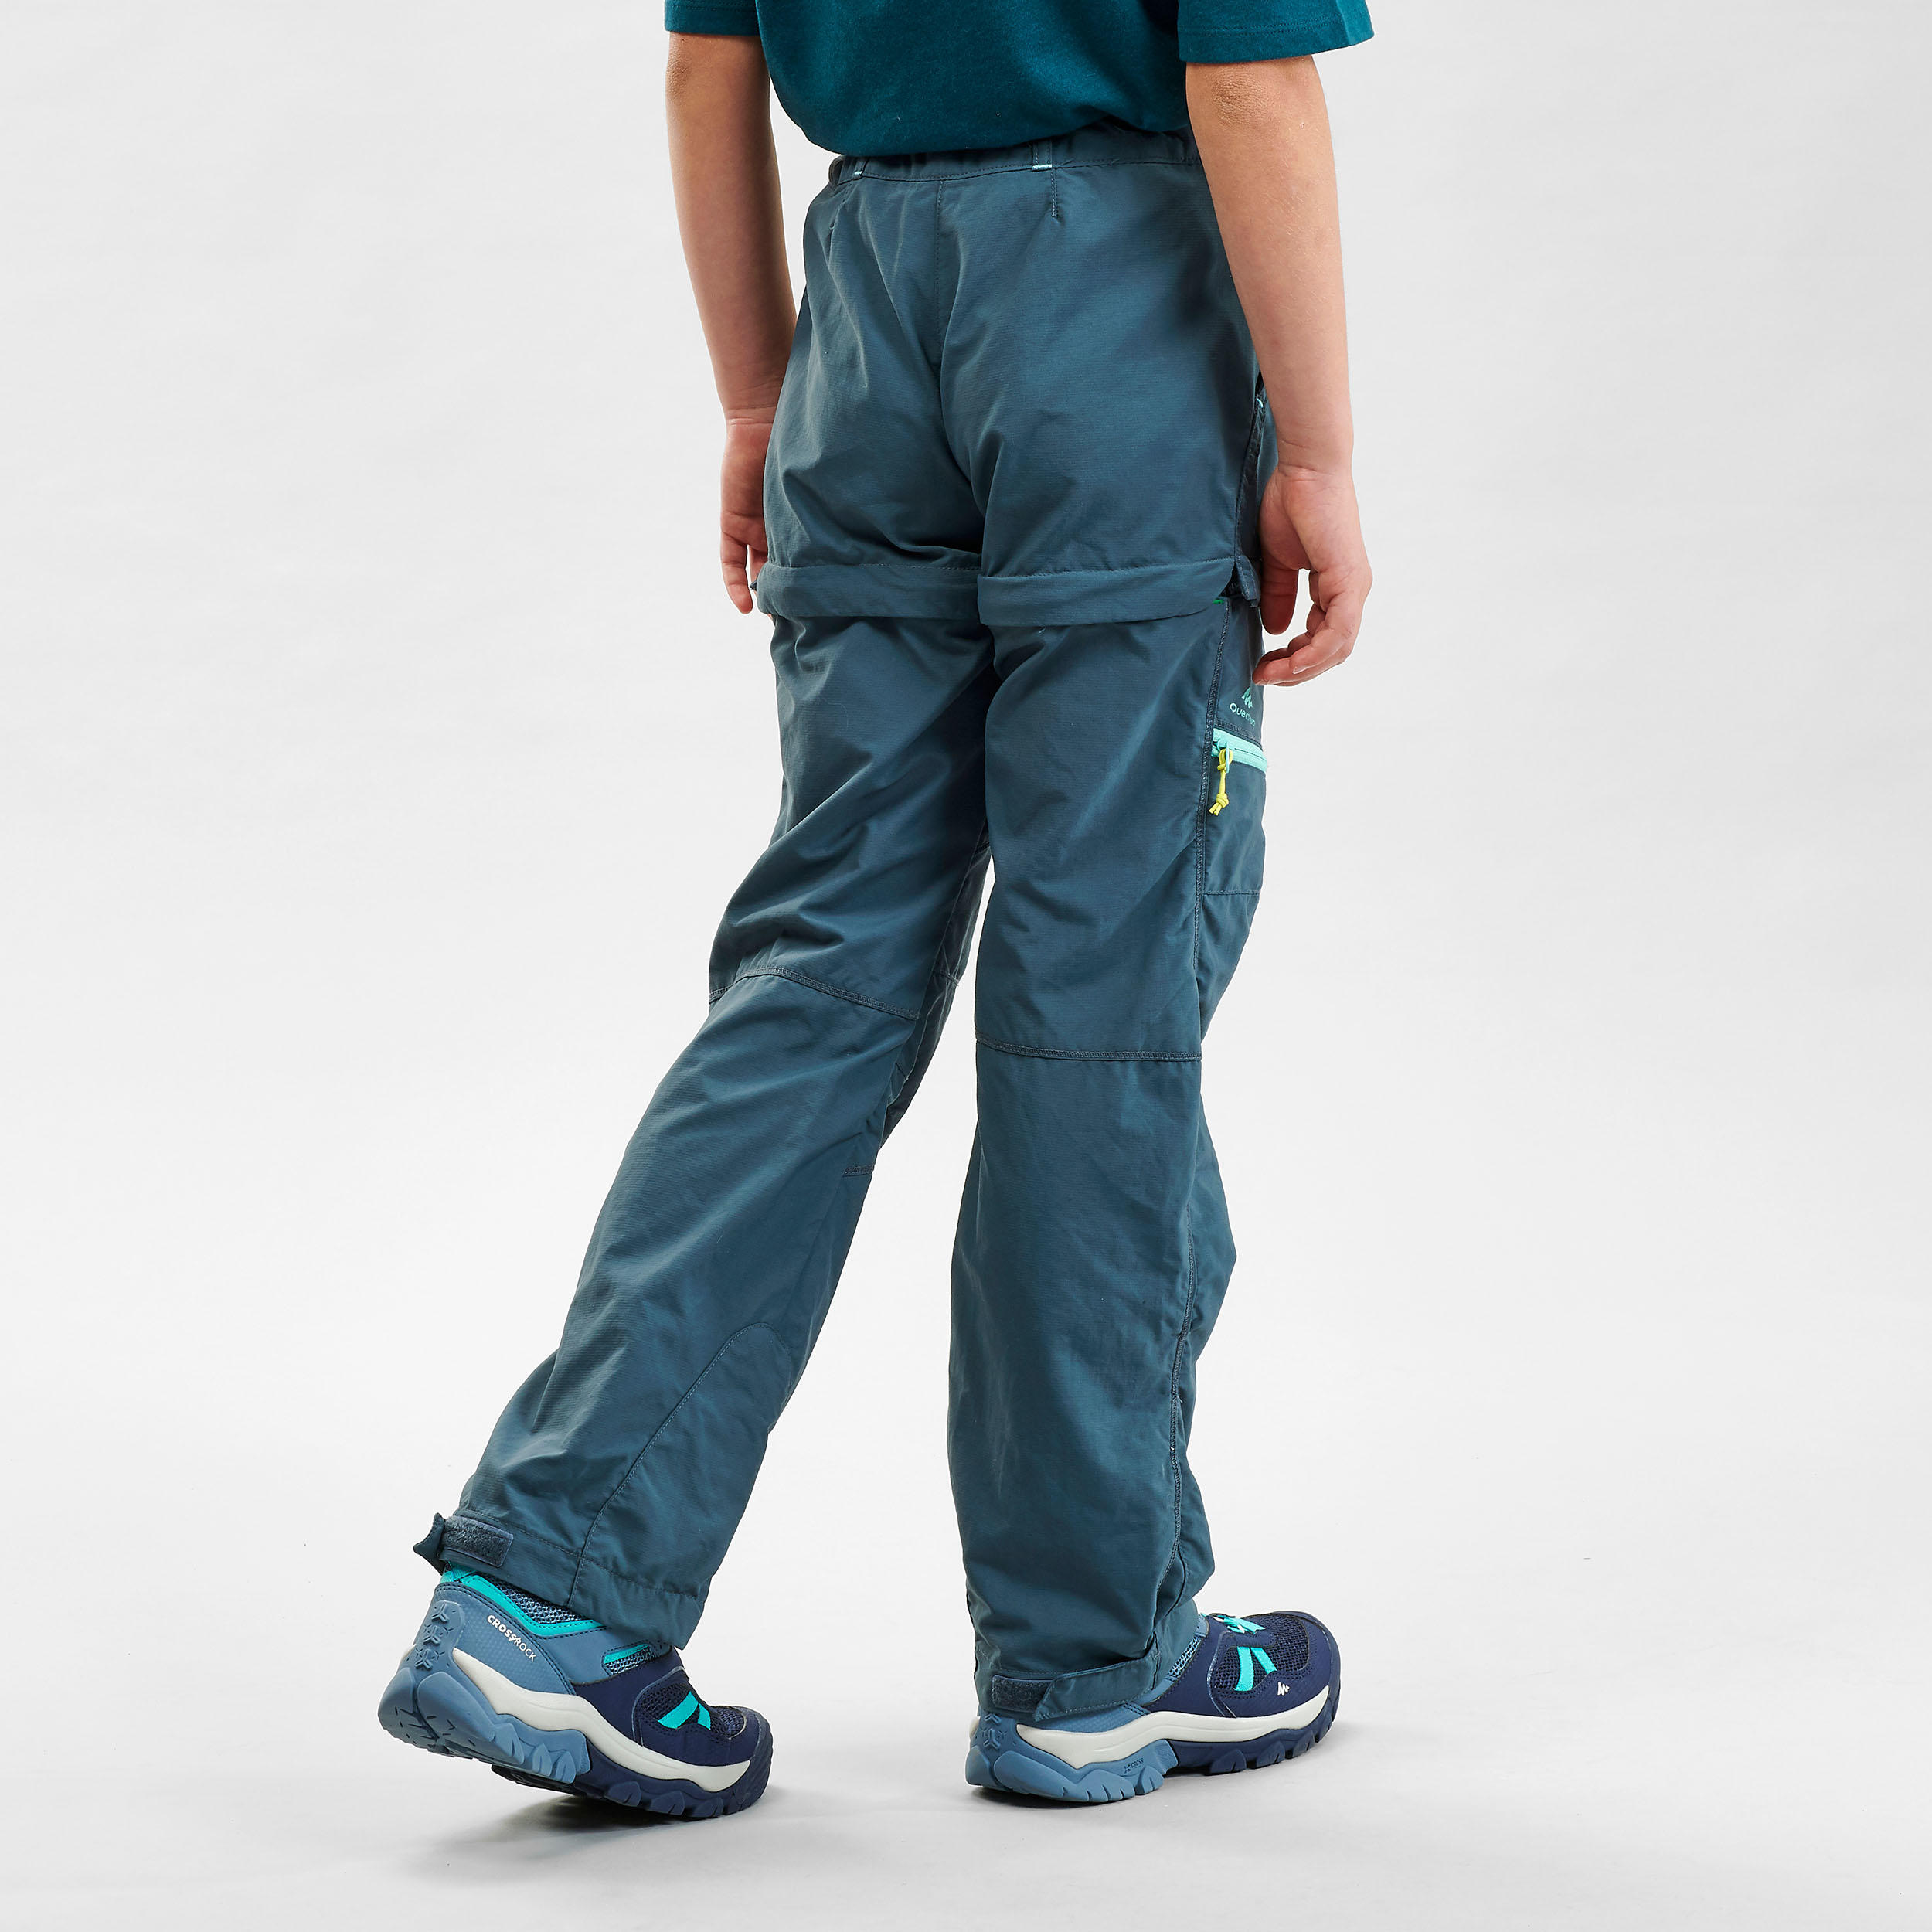 Kids’ Modular Hiking Trousers MH500 KID Aged 7-15 Turquoise 4/10